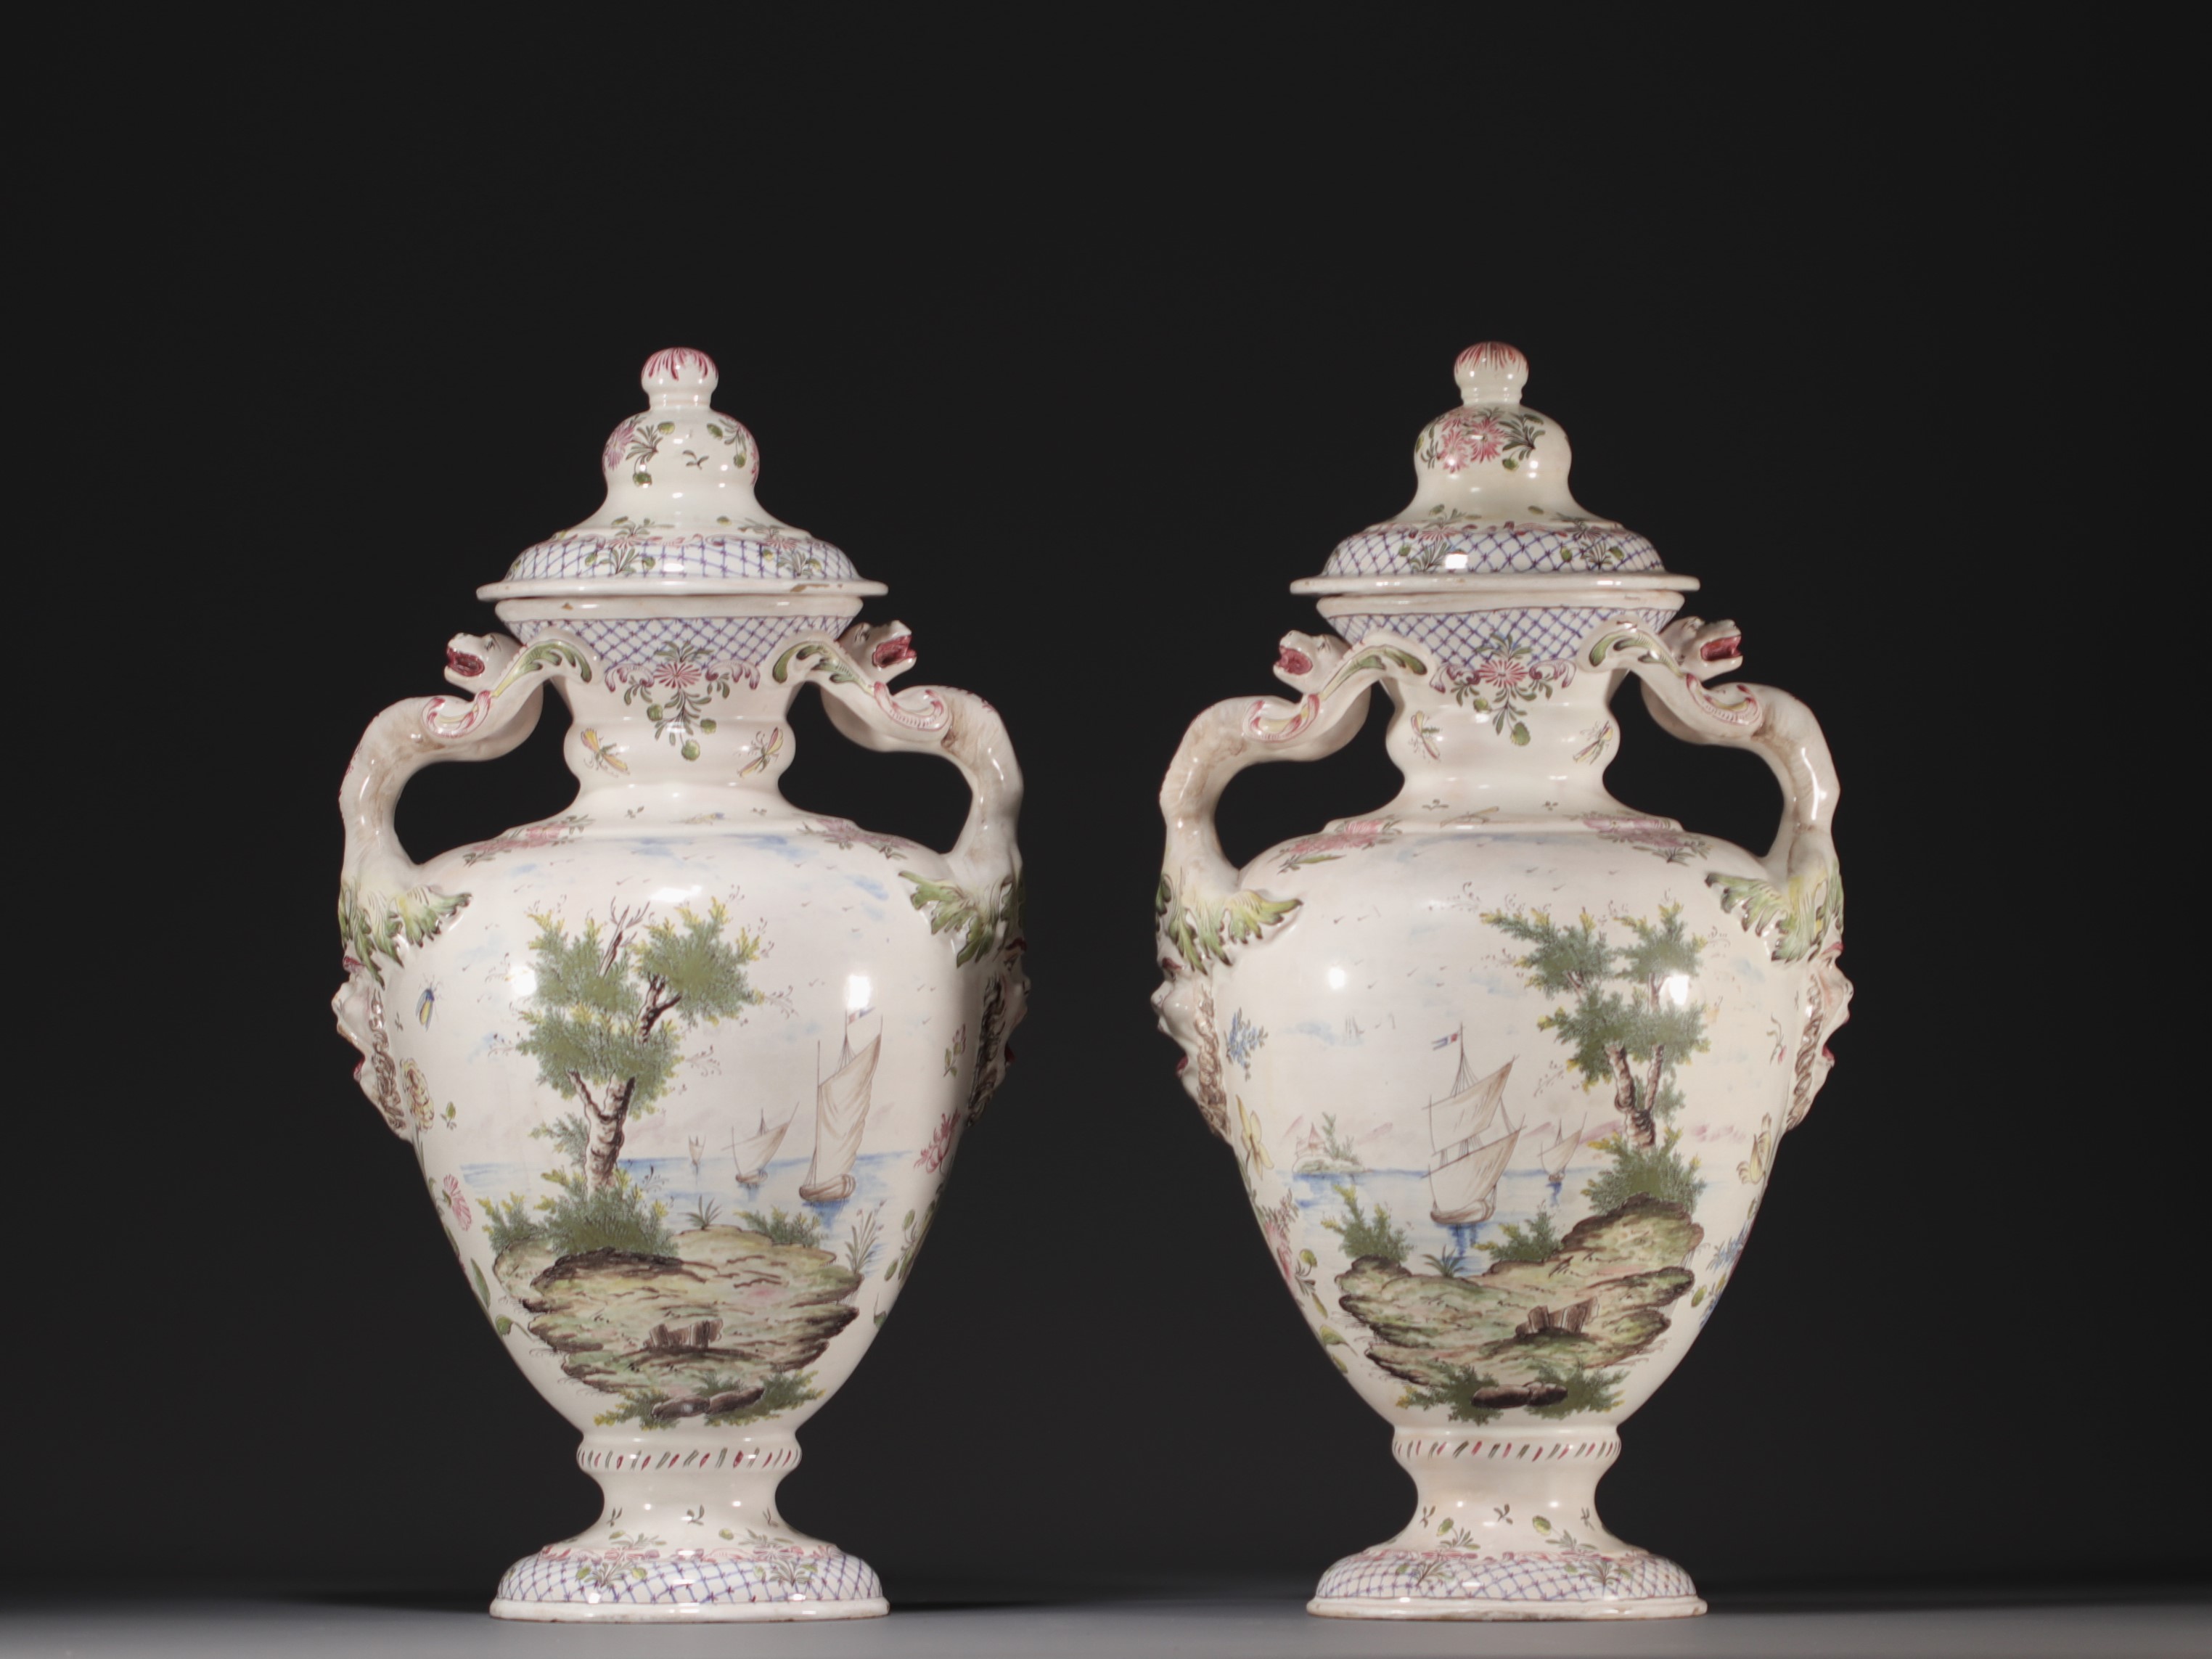 Pair of covered vases in Marseille earthenware, marked JR for Joseph ROBERT(?). - Image 3 of 4